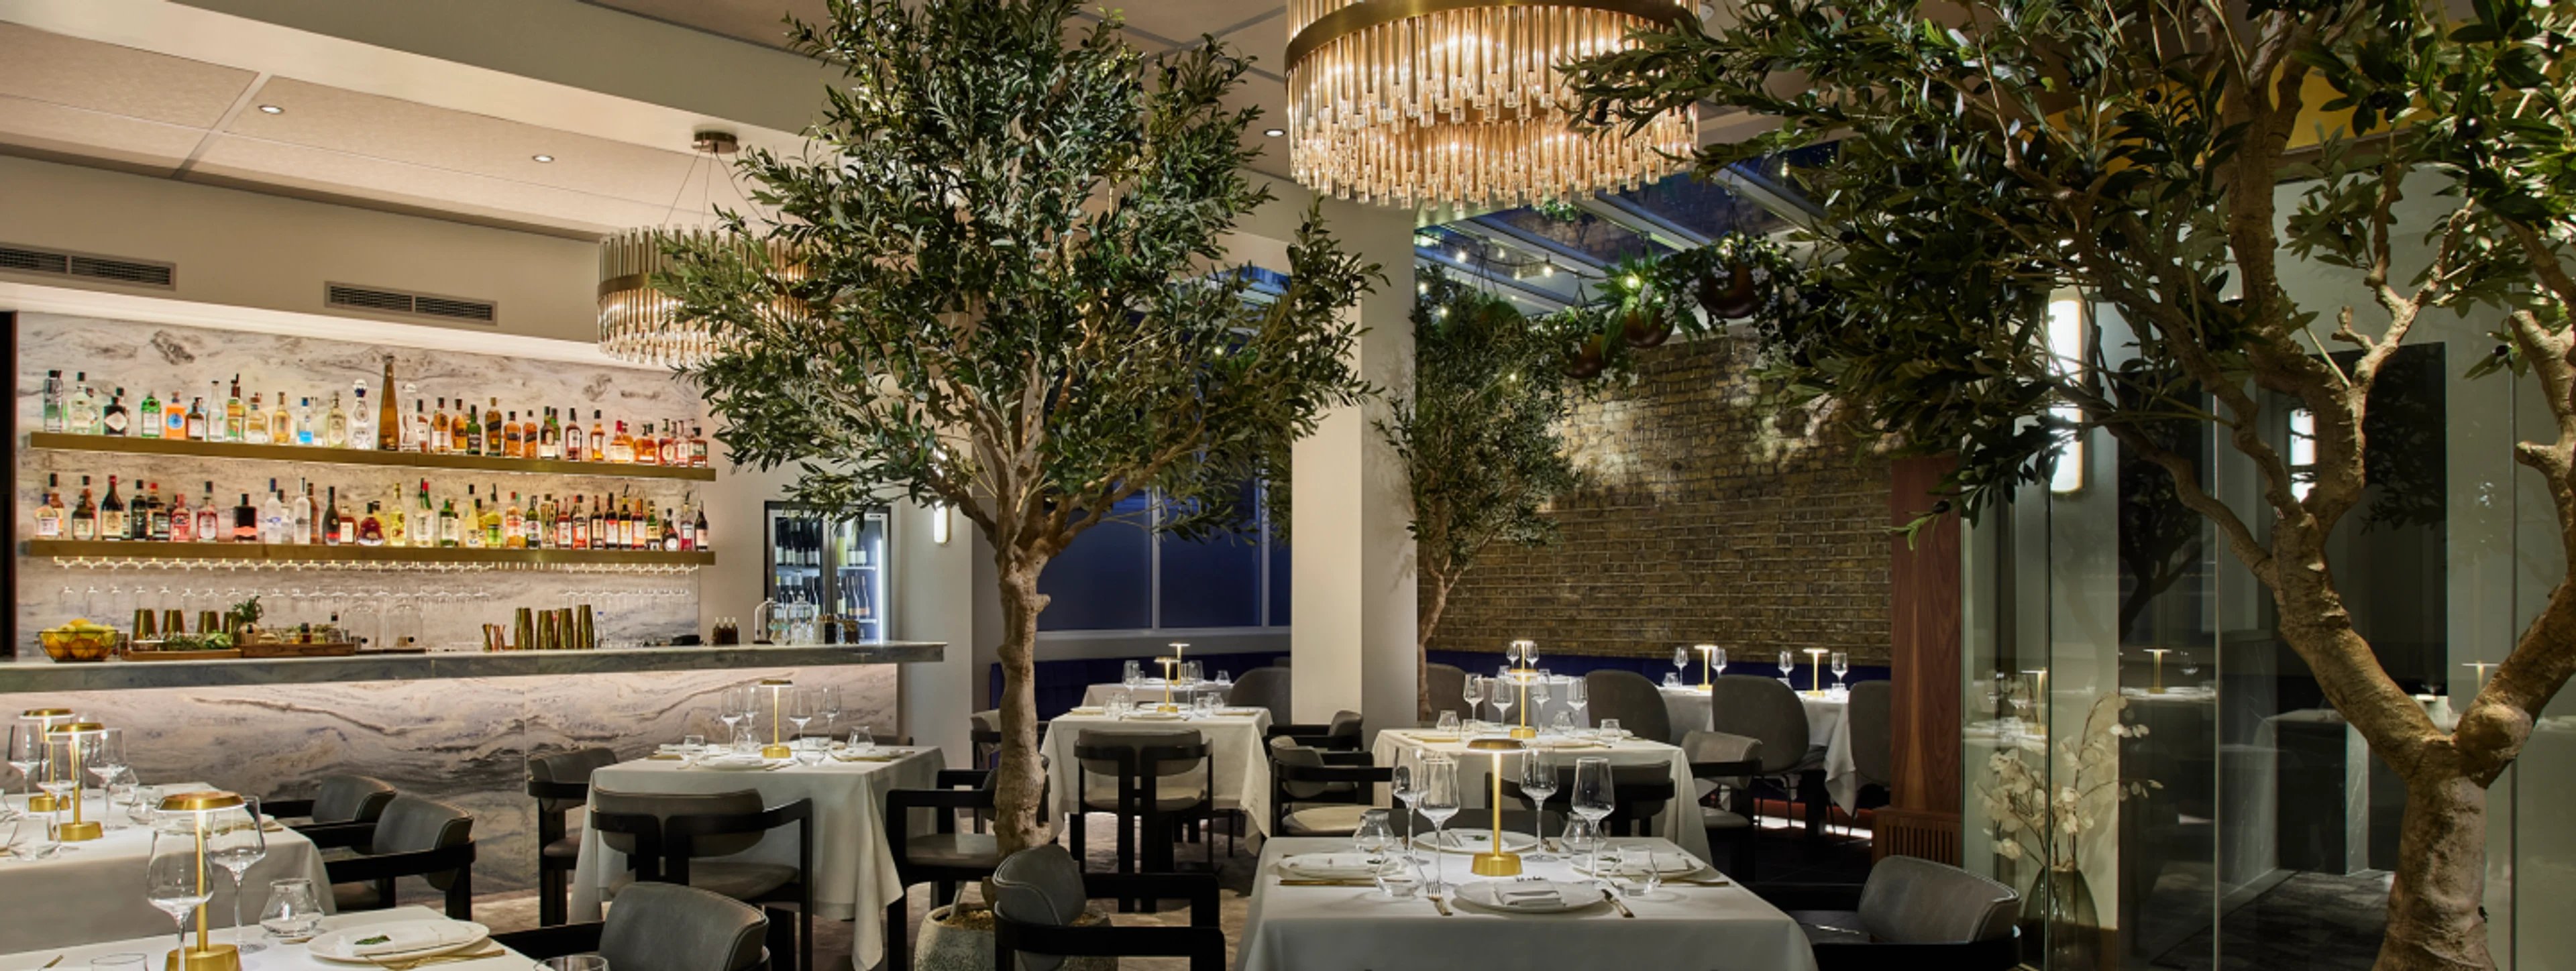 Truffle season is here: where to dine on the delicacy in London